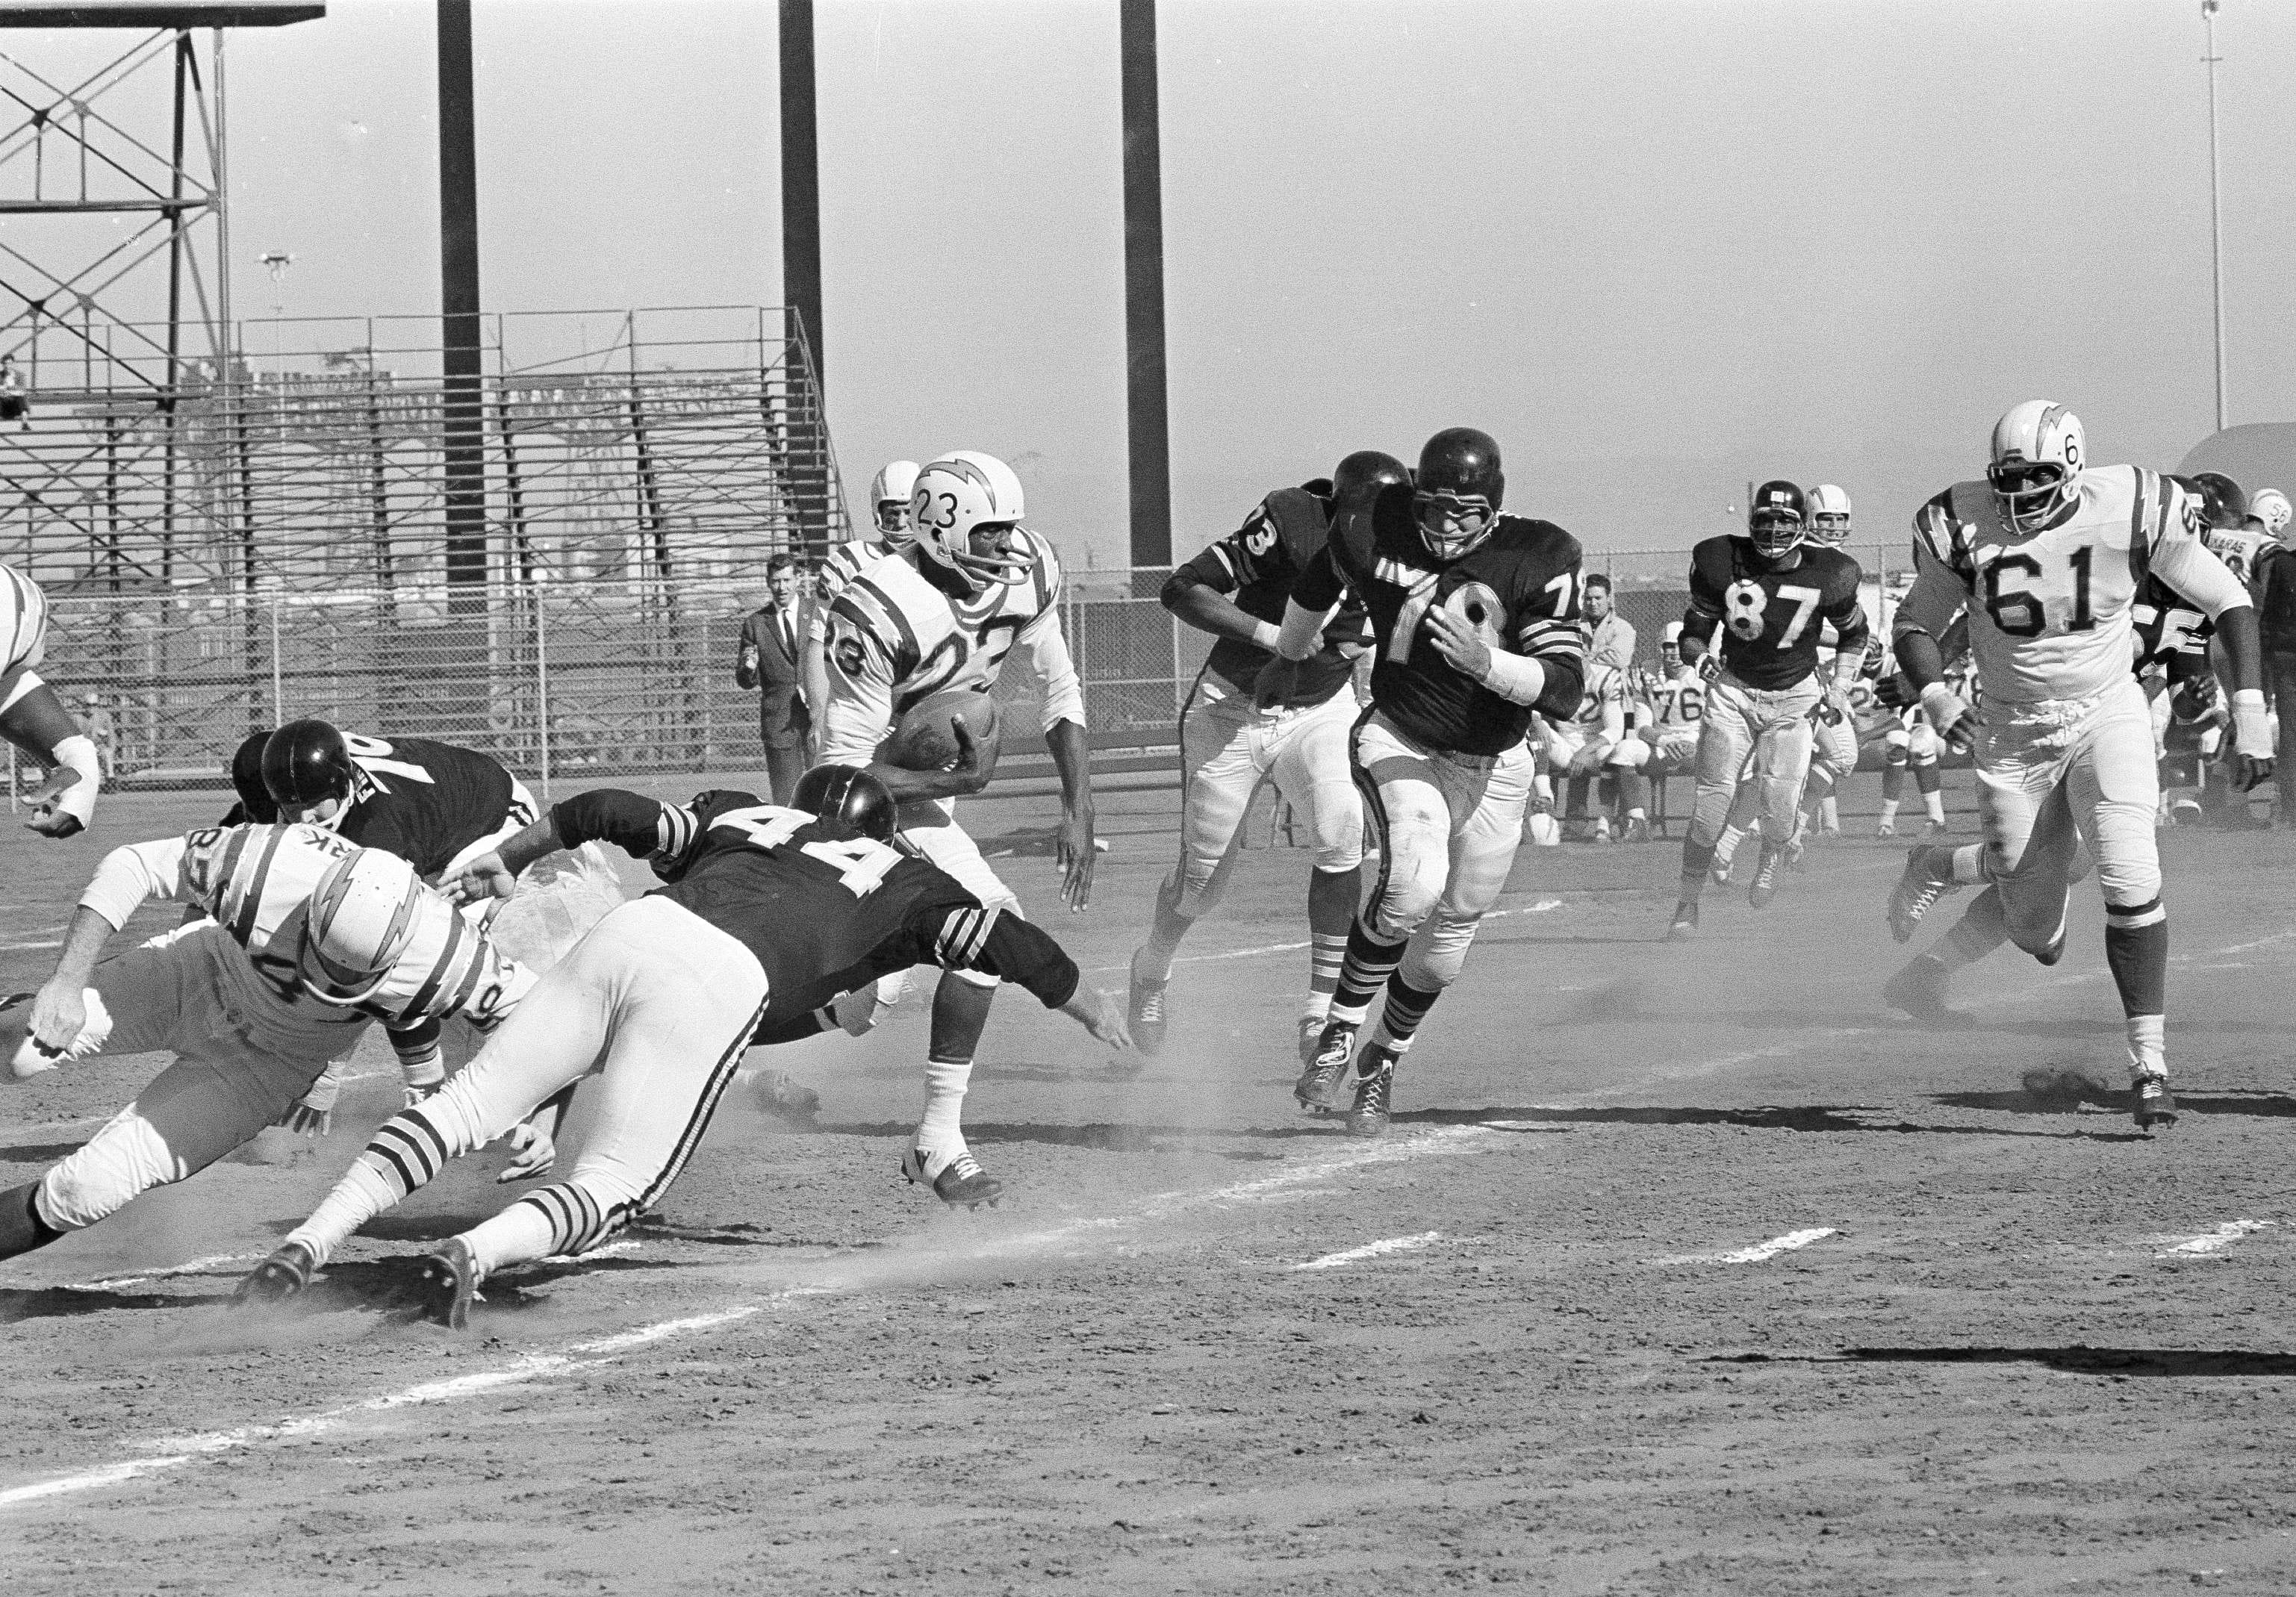 San Diego Chargers halfback Paul Lowe carries the ball during a win over the Oakland Raiders in October 1961.